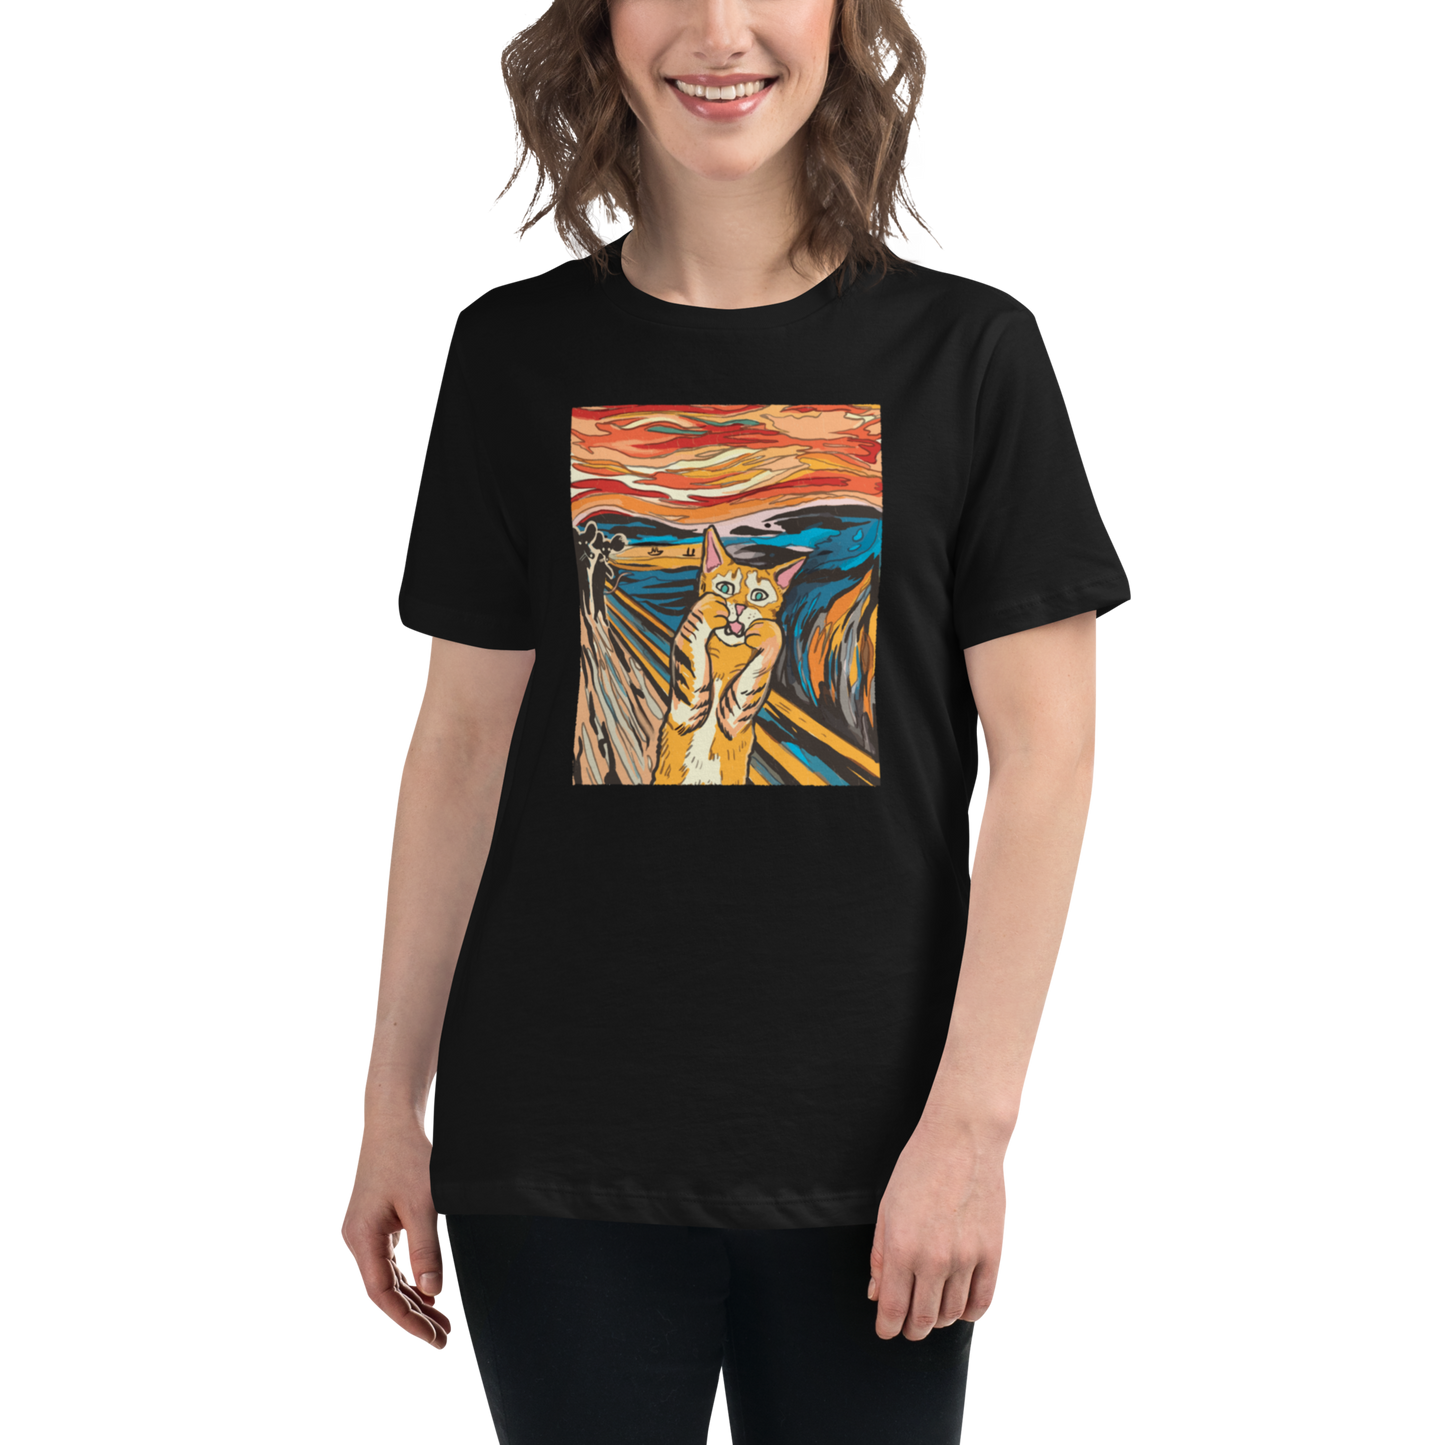 Smiling woman wearing a Women's relaxed black screaming cat t-shirt showcasing iconic The Screaming Cat graphic on the chest - Women's Graphic Cat Tees - Boozy Fox